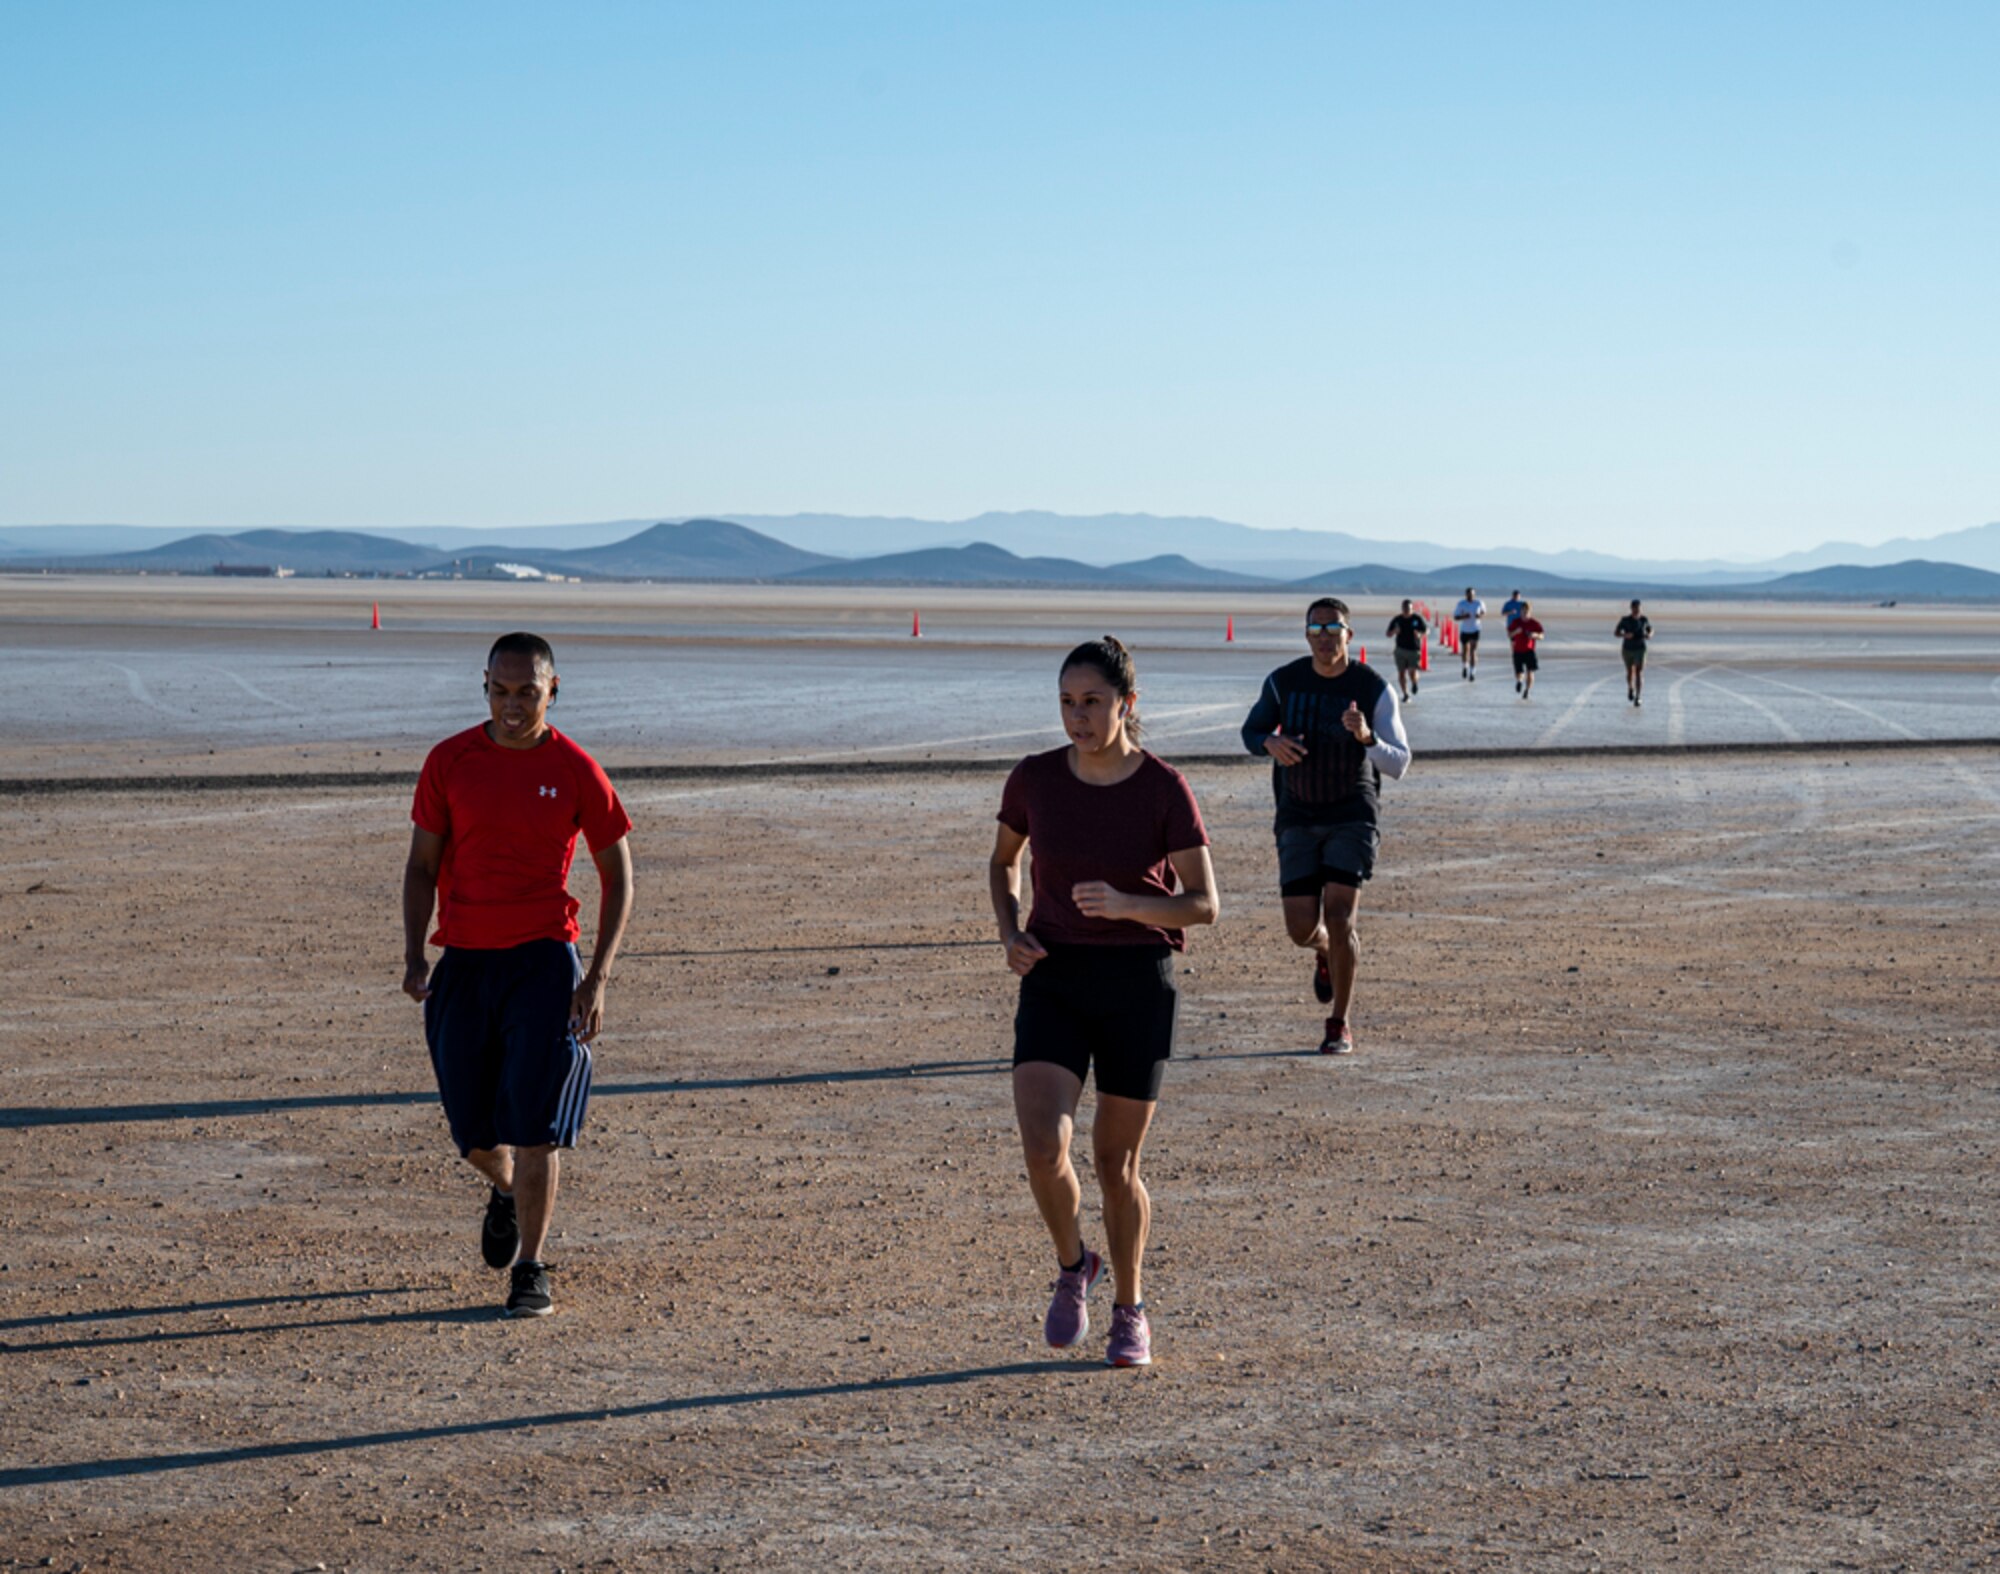 Team Edwards participated in a Flight Line 5K/10K/15K Run-Walk Event July 5th where participants had the chance to experience running on the flight line and Rogers Dry Lake Bed. This is all thanks to the 412th Force Support Squadron.